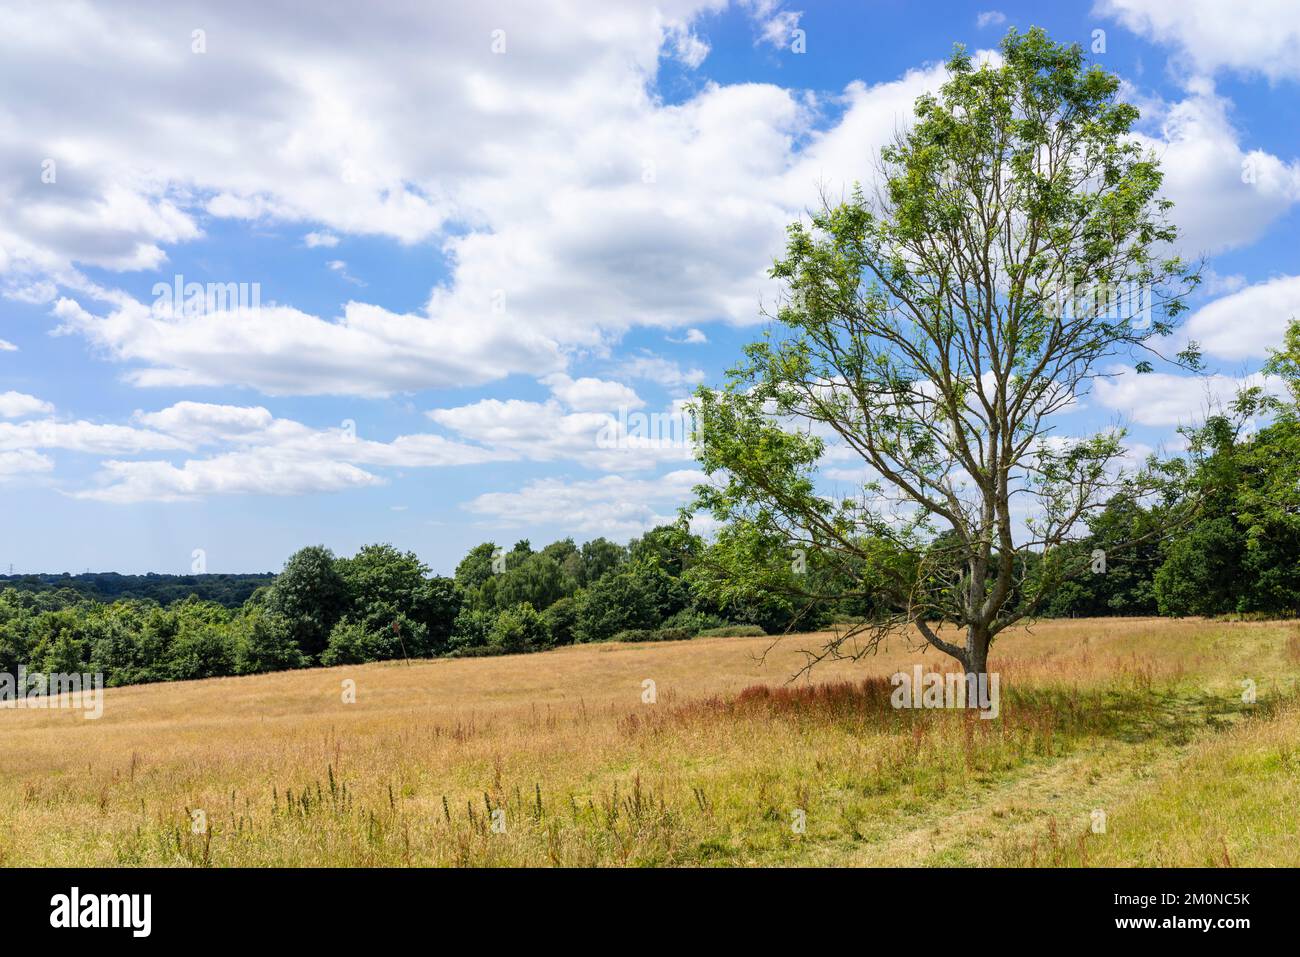 Battle Hastings East Sussex tree in the meadow that was the actual site of the 1066 Battle of Hastings Battlefield in Battle England UK GB Europe Stock Photo